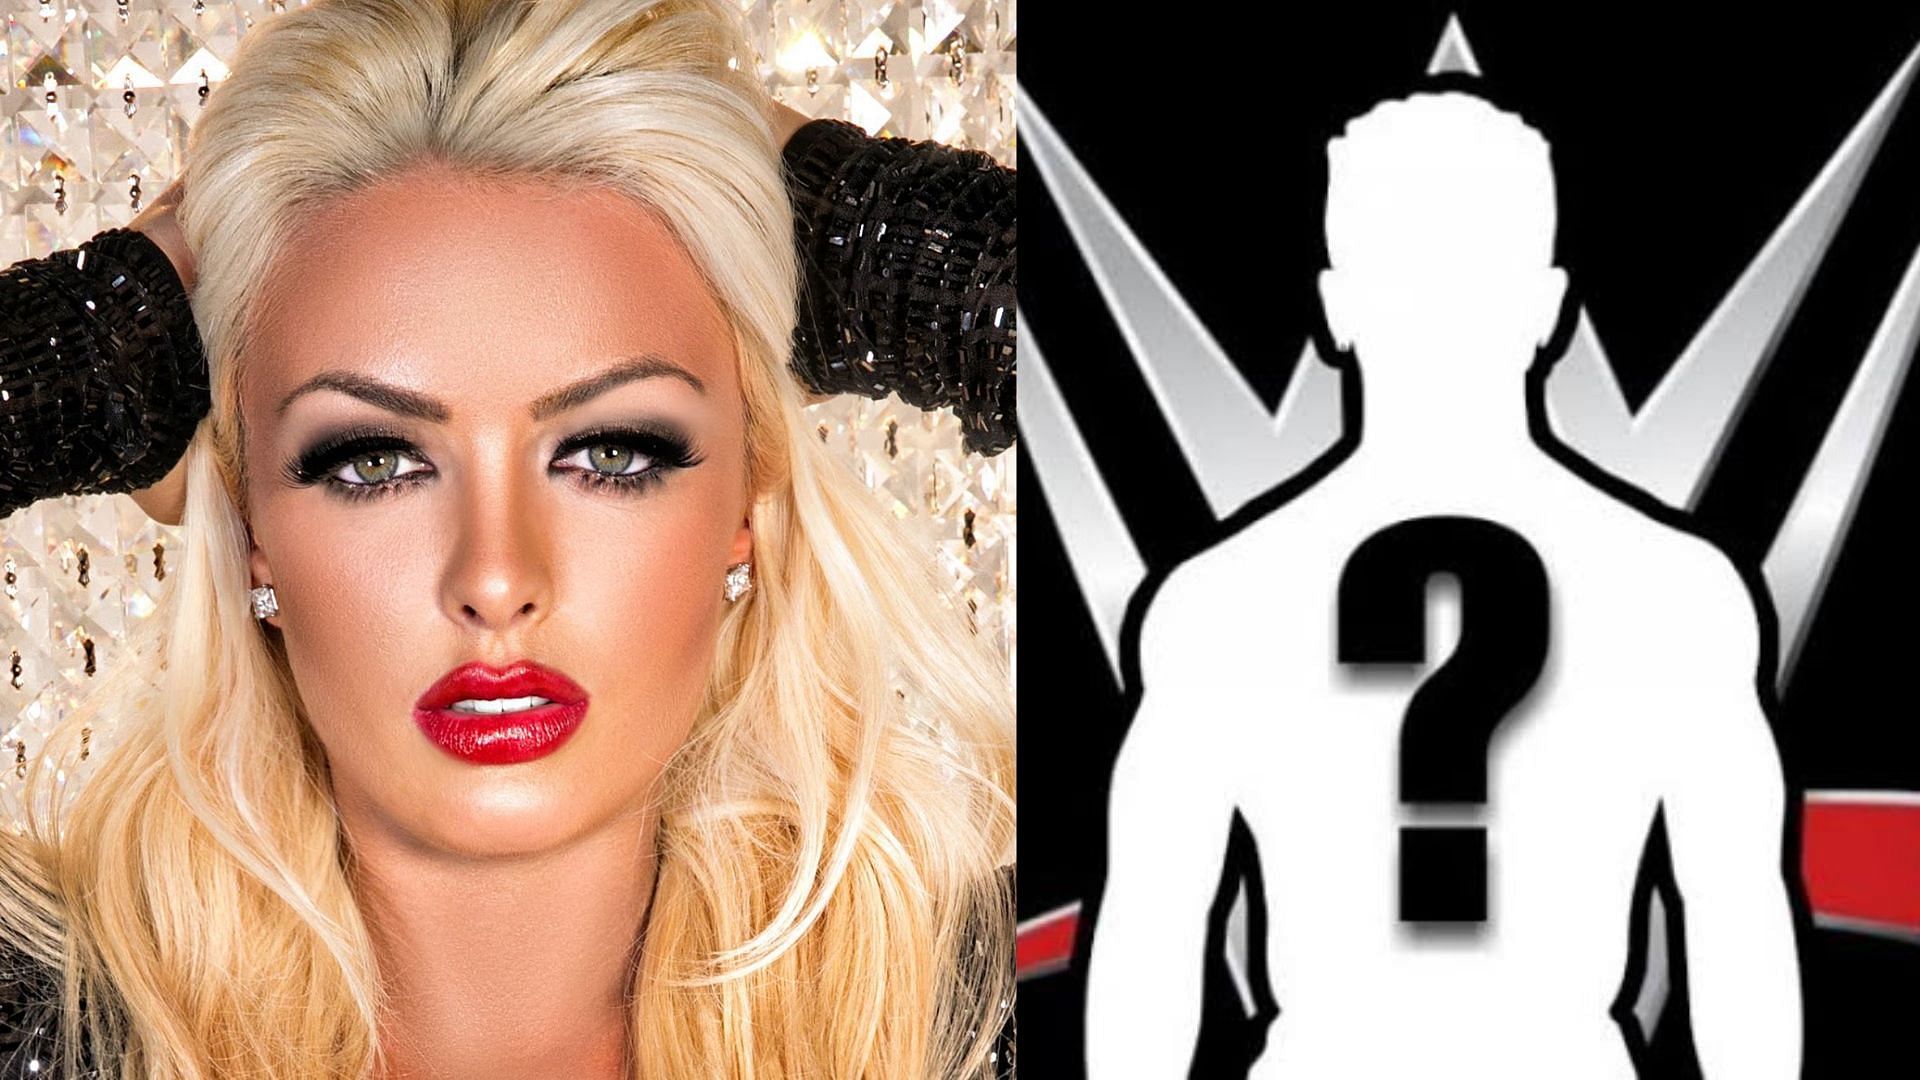 Mandy Rose has reacted to a WWE Superstar recently praising her